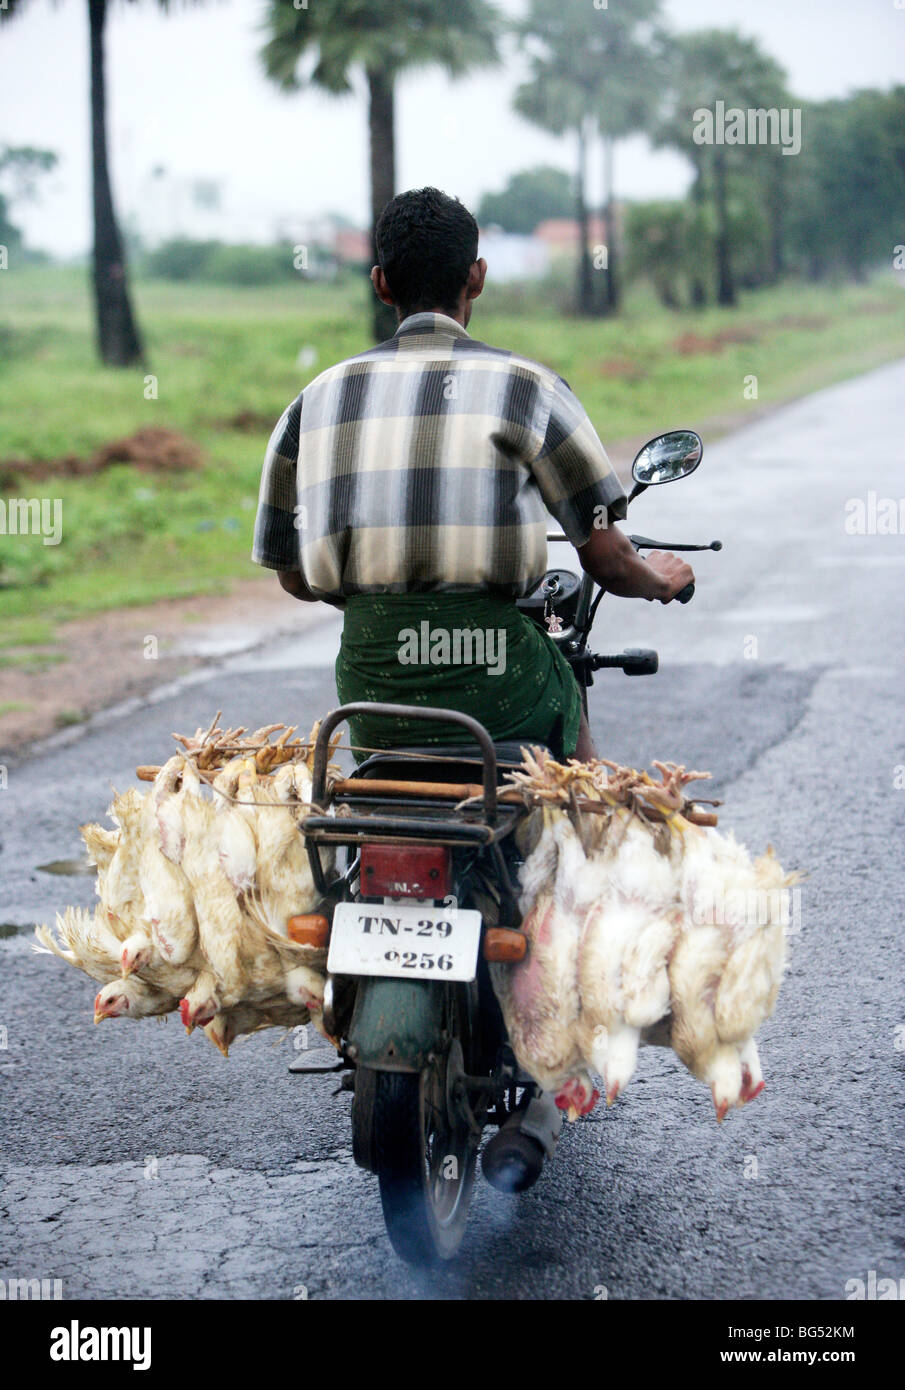 living chicken hang on a motor cycle, Tamil Nadu, India Stock Photo